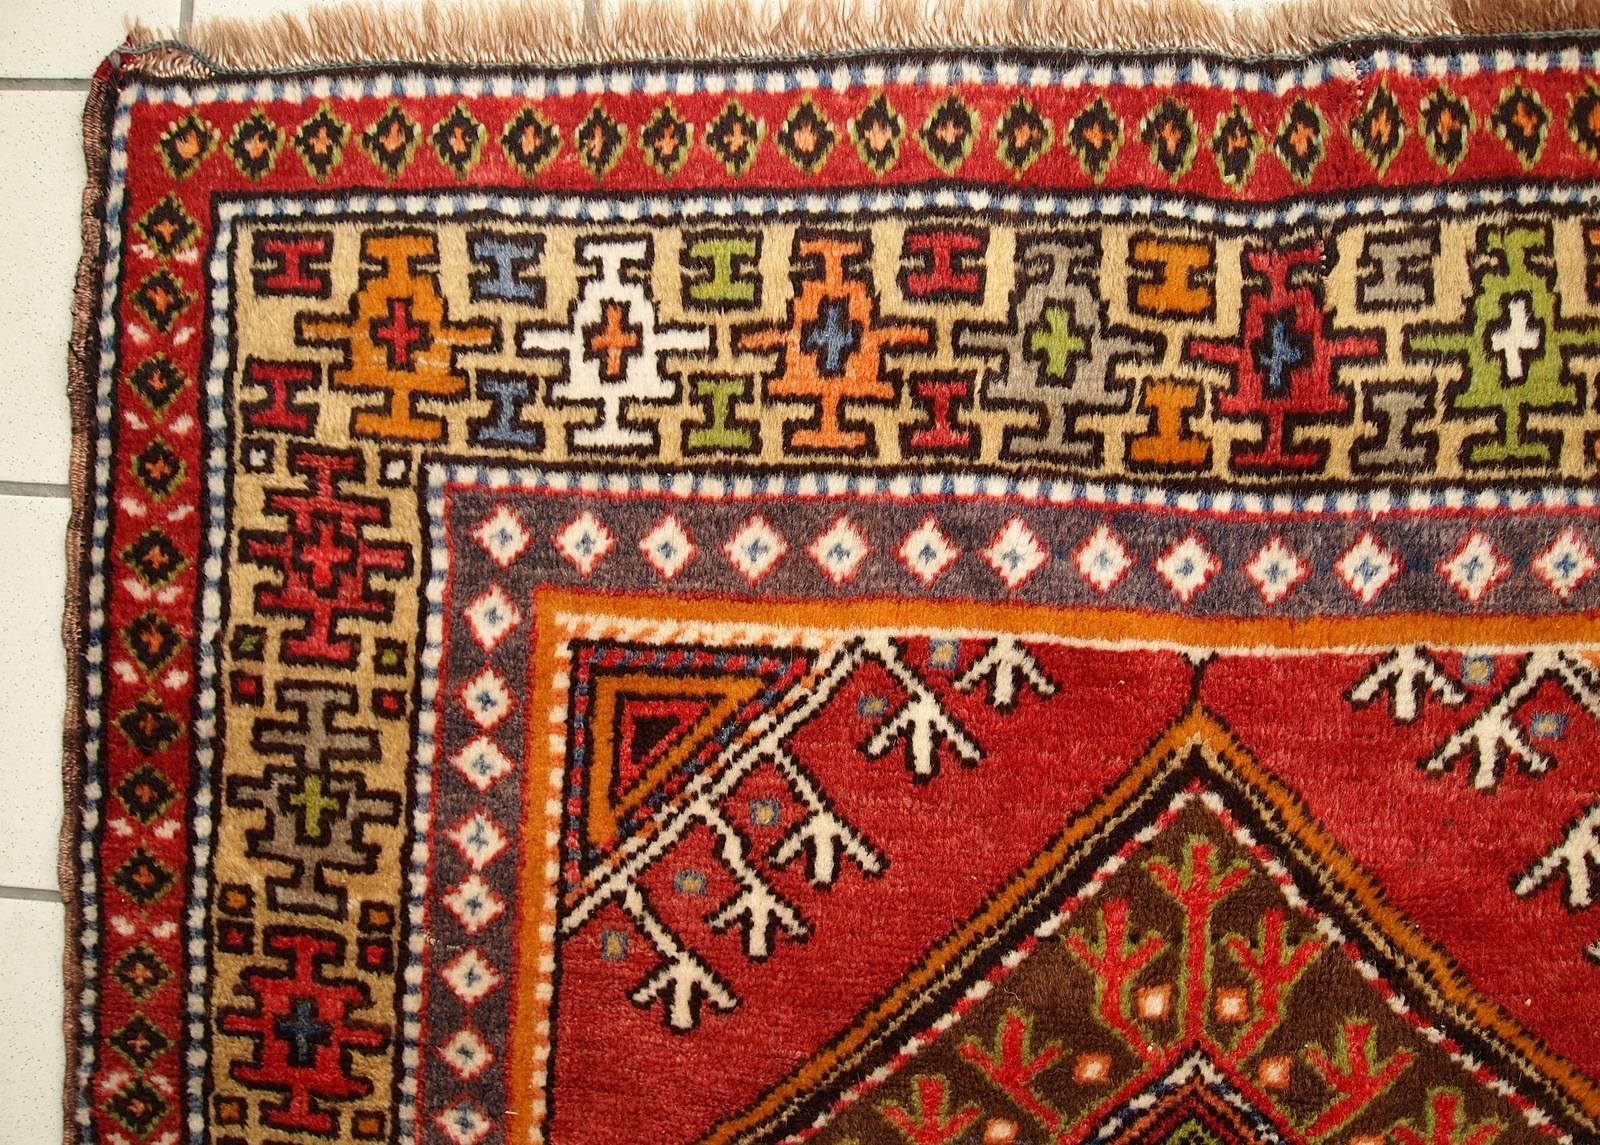 Antique Turkish Anatolian rug in original condition. Beautiful red filed with three diamond shaped medallions in brown color. The yellow border is covered in geometric colorful ornaments. Wool is very soft on this rug. The pile is full, no stains or